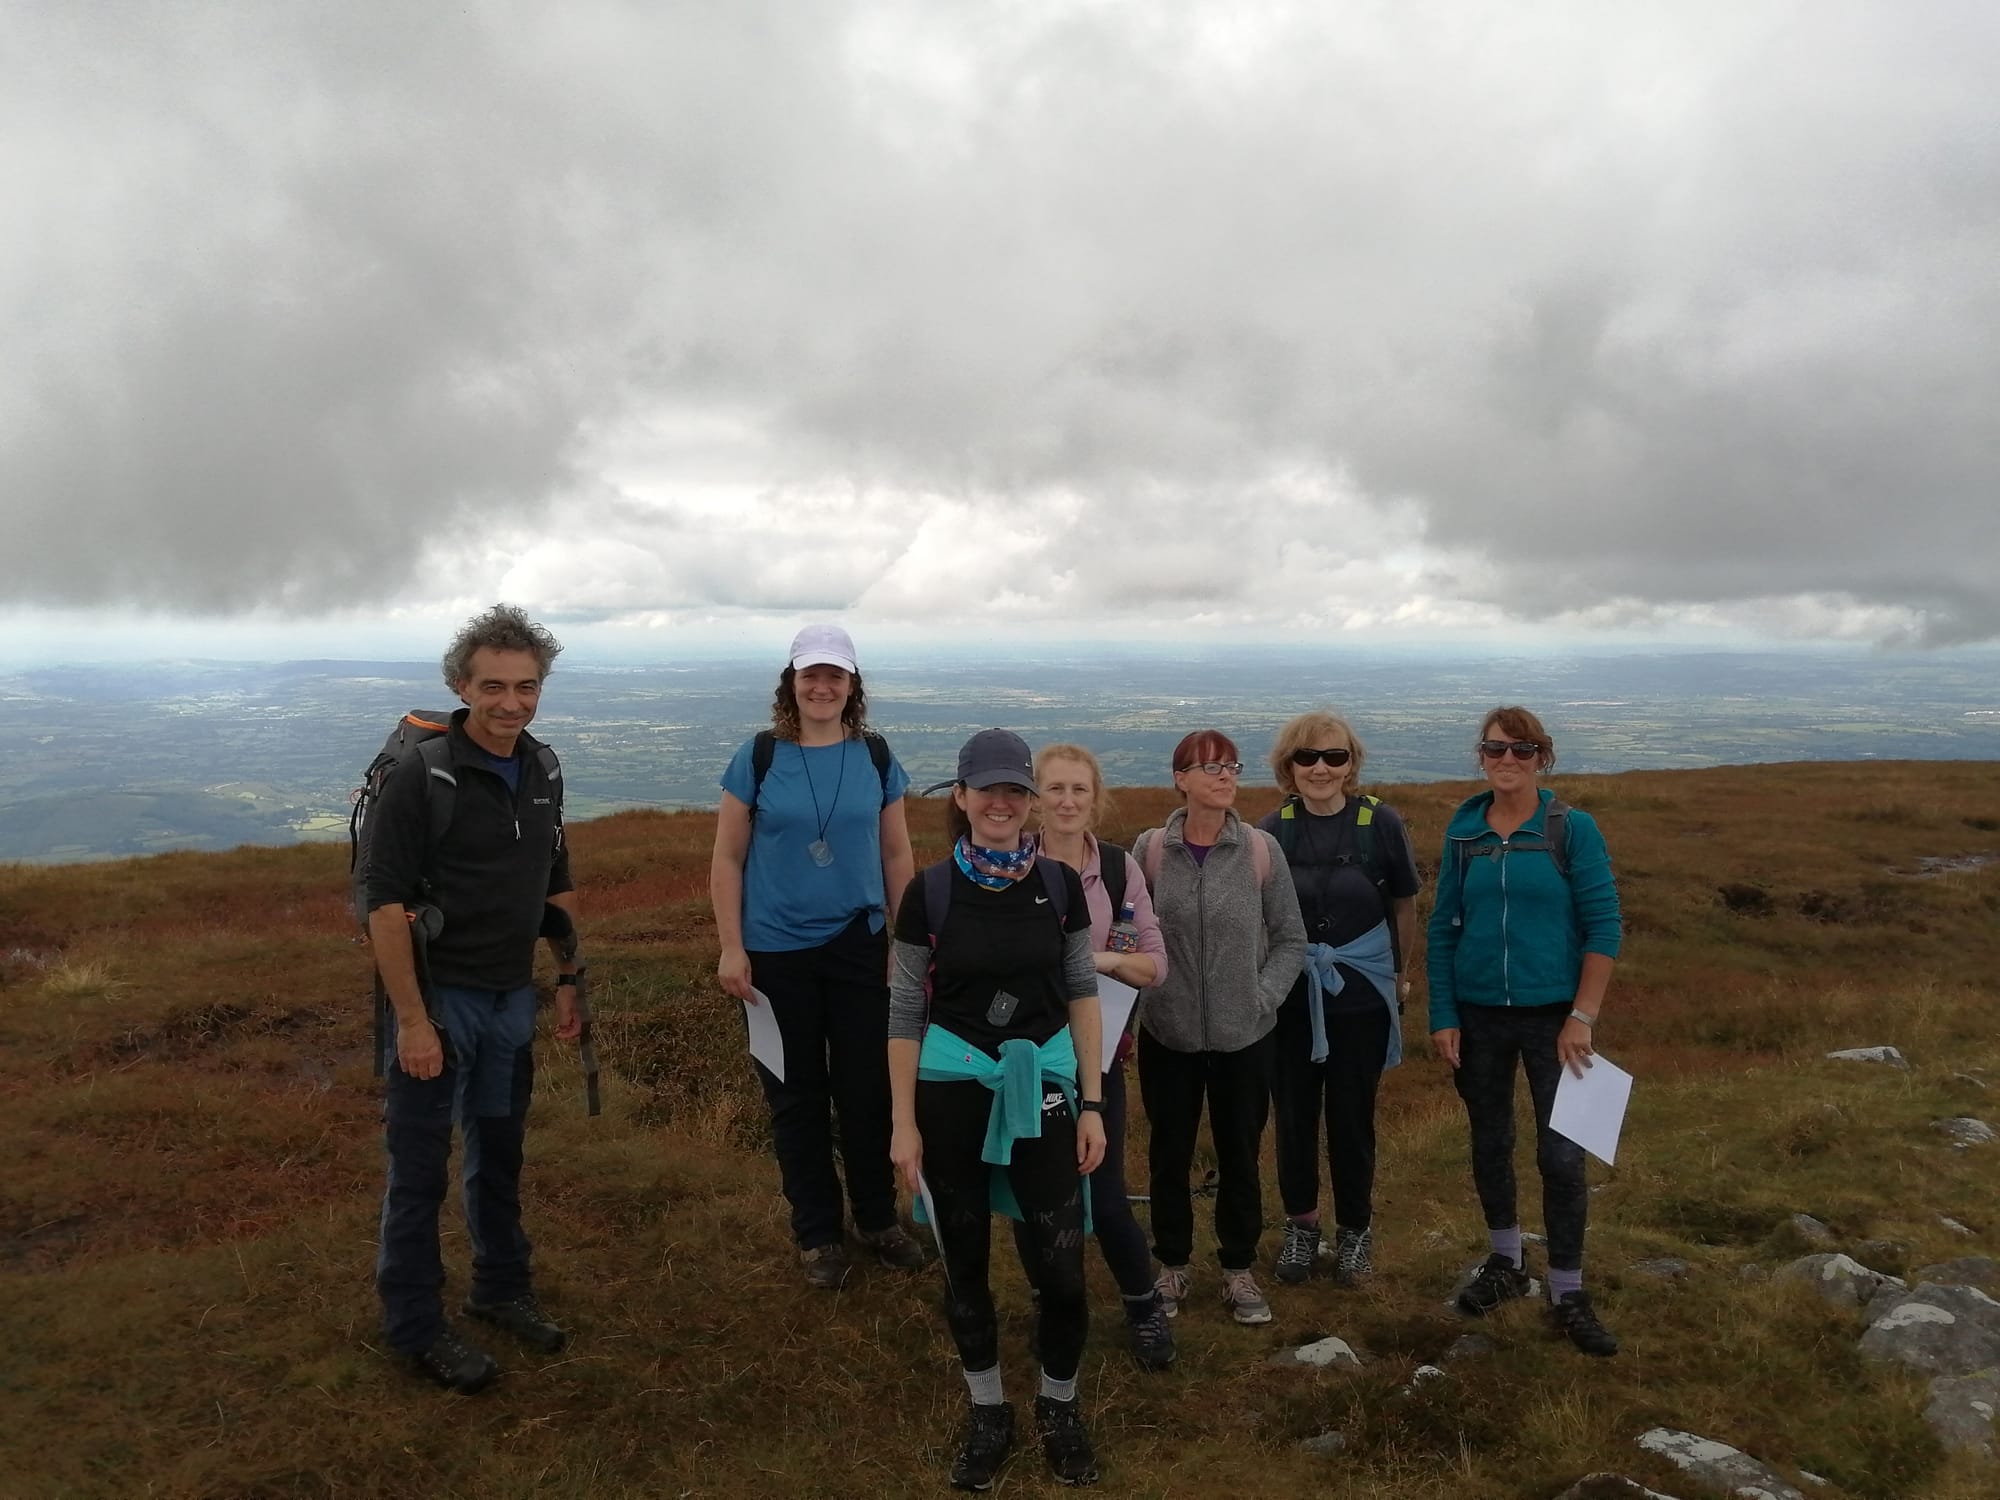 Hikers on top of a scenic Irish mountain smiling